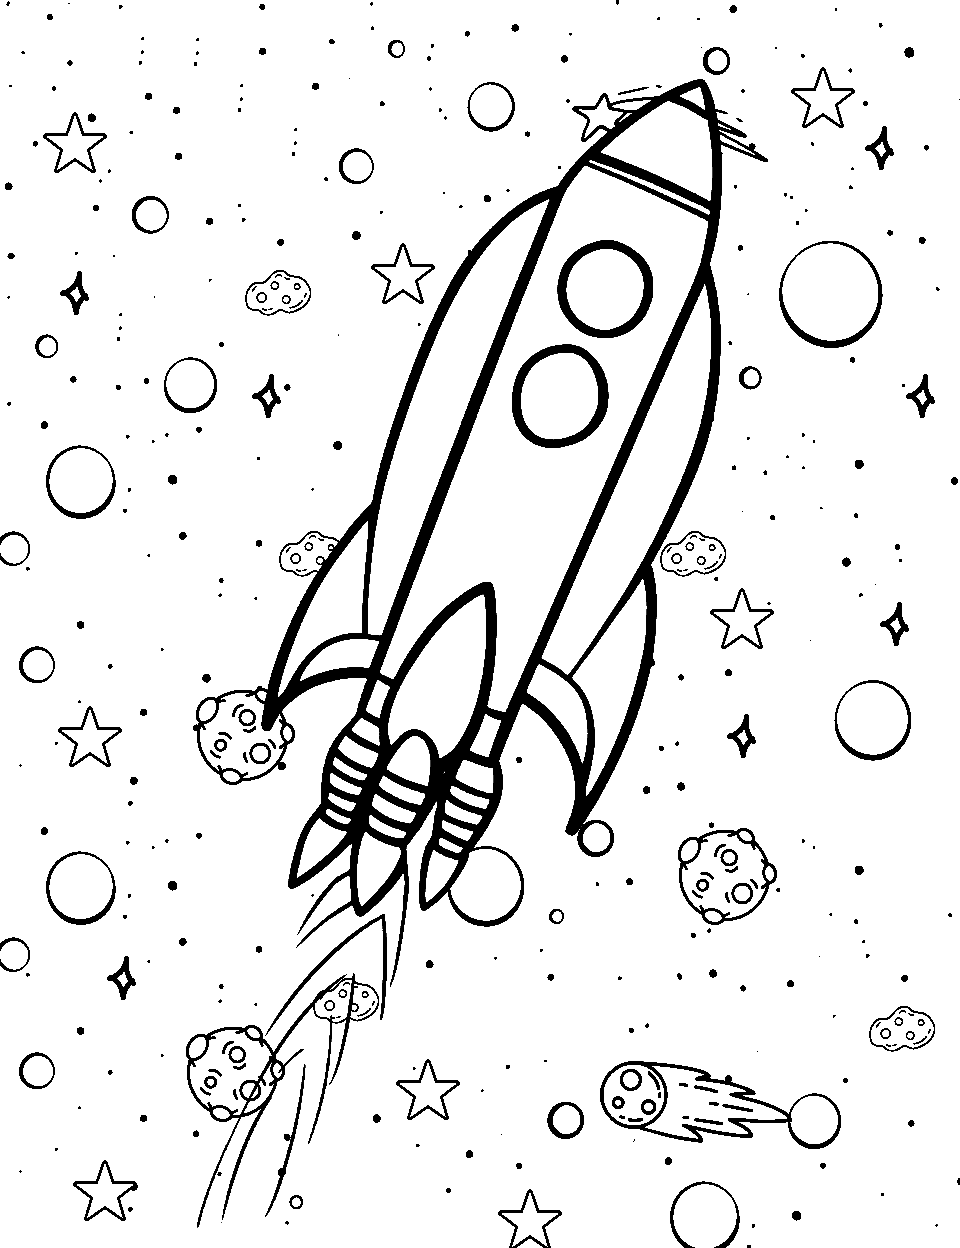 Rocket's Radiant Ride Coloring Page - A rocket leaving a trail as it zooms through space.